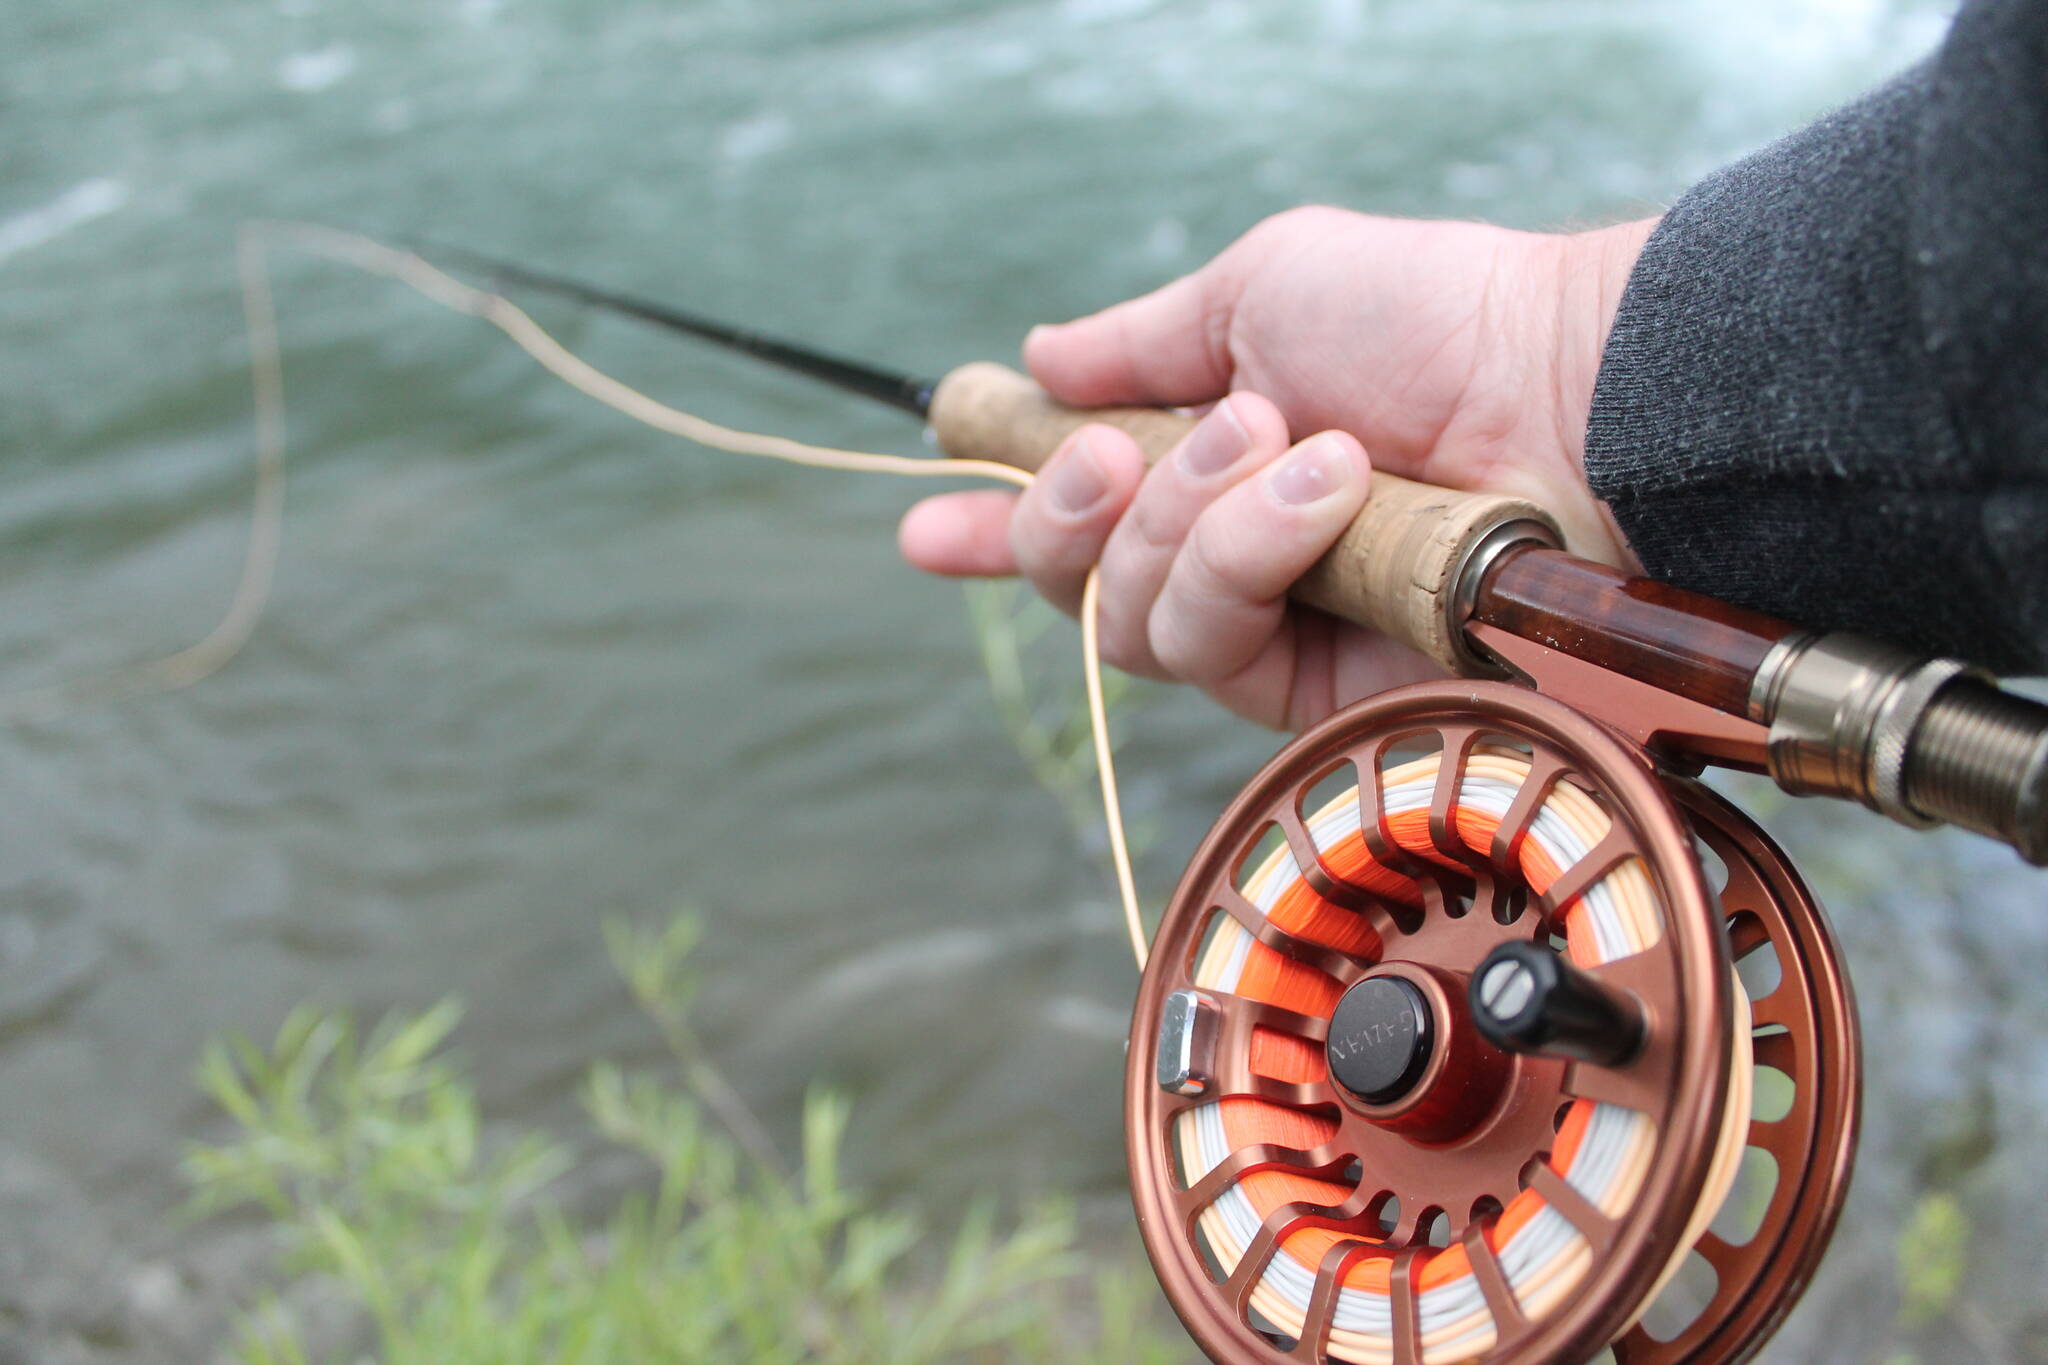 The author thought this reel was about five years old, but this photo from a trip to the Truckee River in California seven years ago made him realize just how long his favorite reel has been around. (Jeff Lund / For the Juneau Empire)